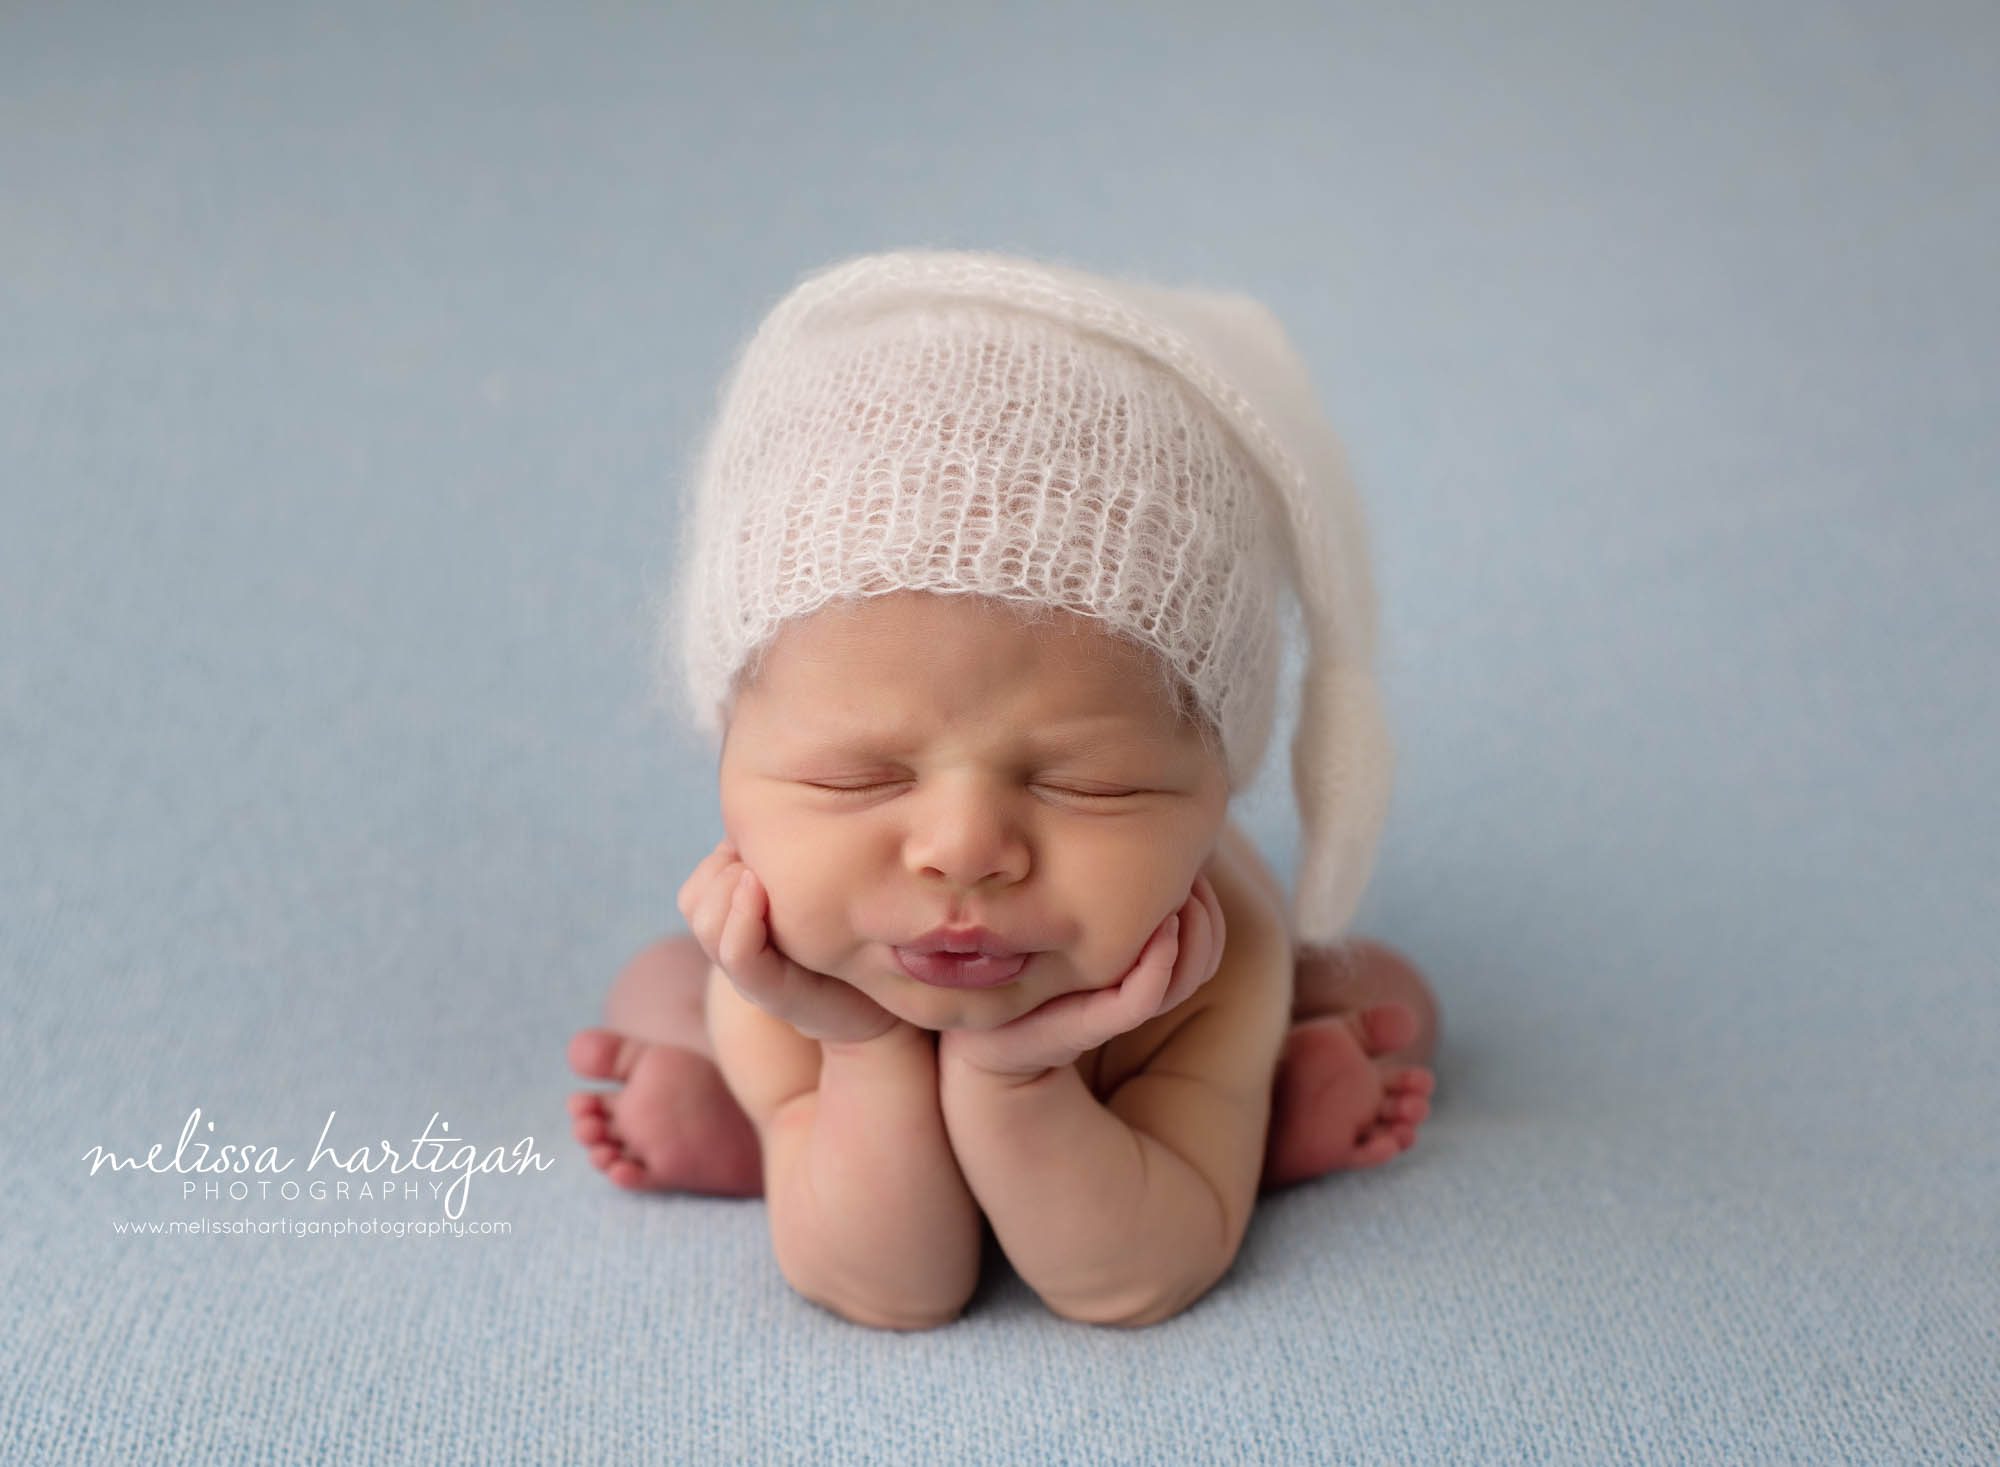 baby boy posed froggy pose on light blue backdrop wearing knitted sleepy cap